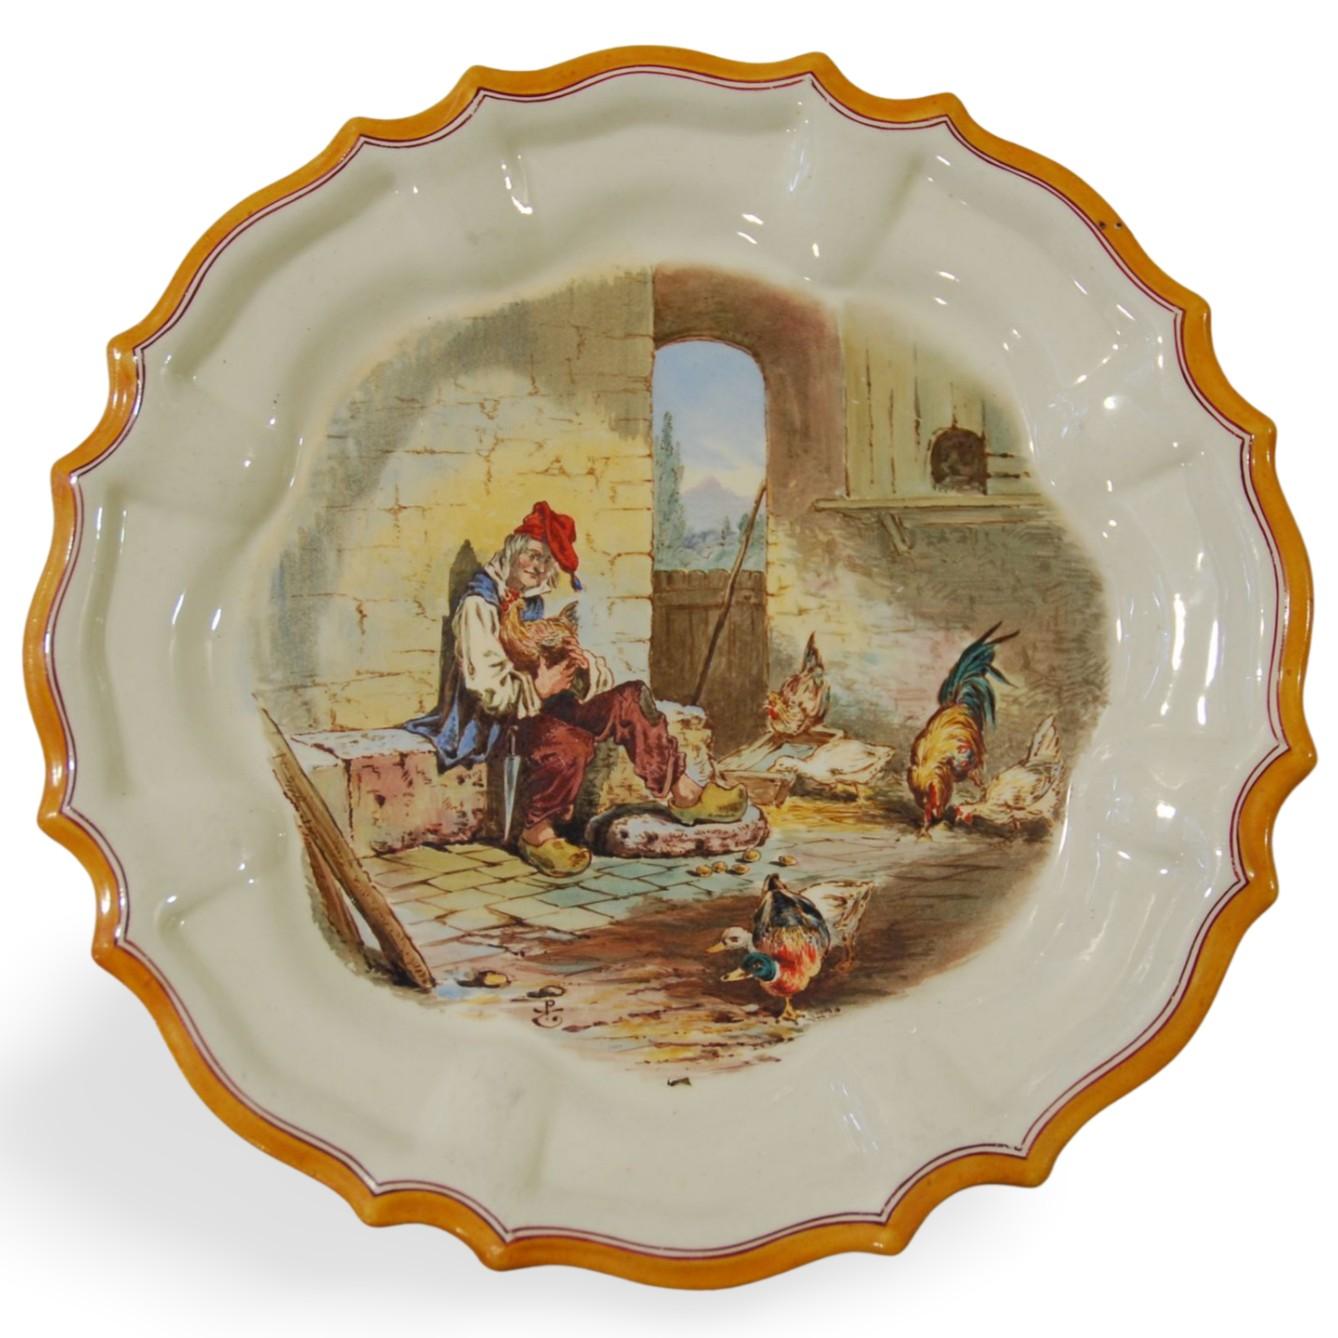 Set of 12 Plates, Aesop Fables, Wedgwood, circa 1860 For Sale 5